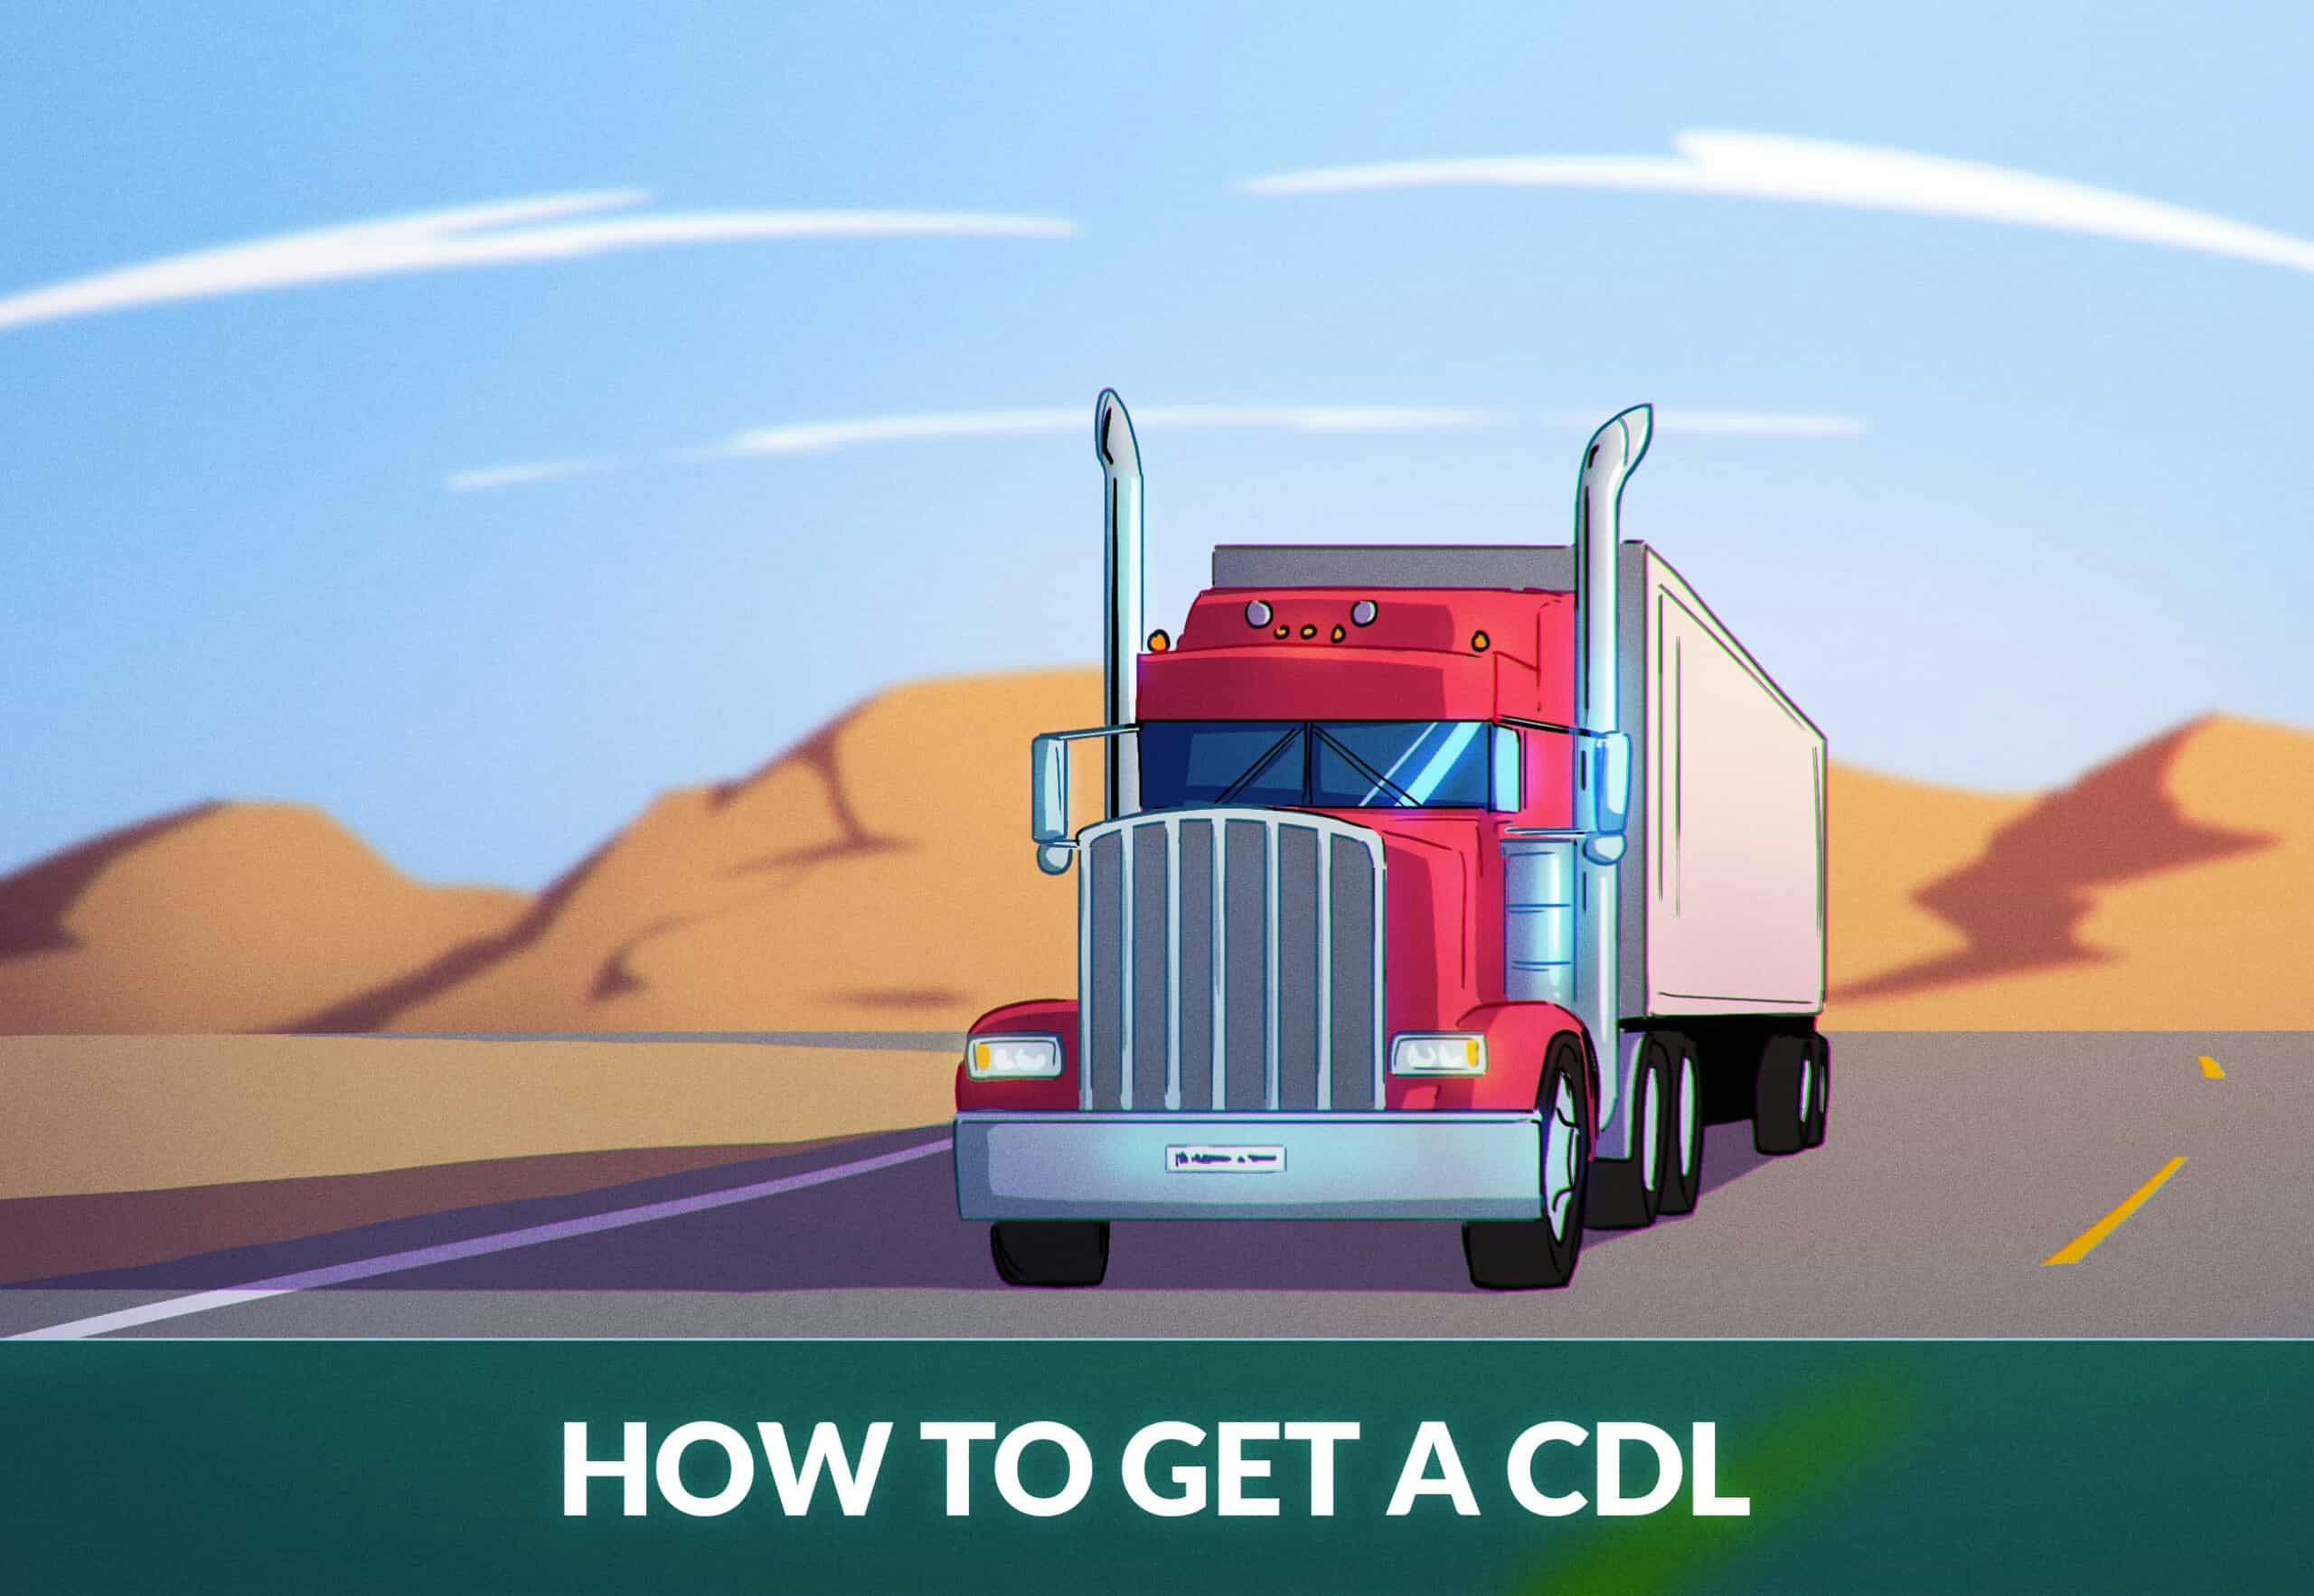 How to get a cdl license